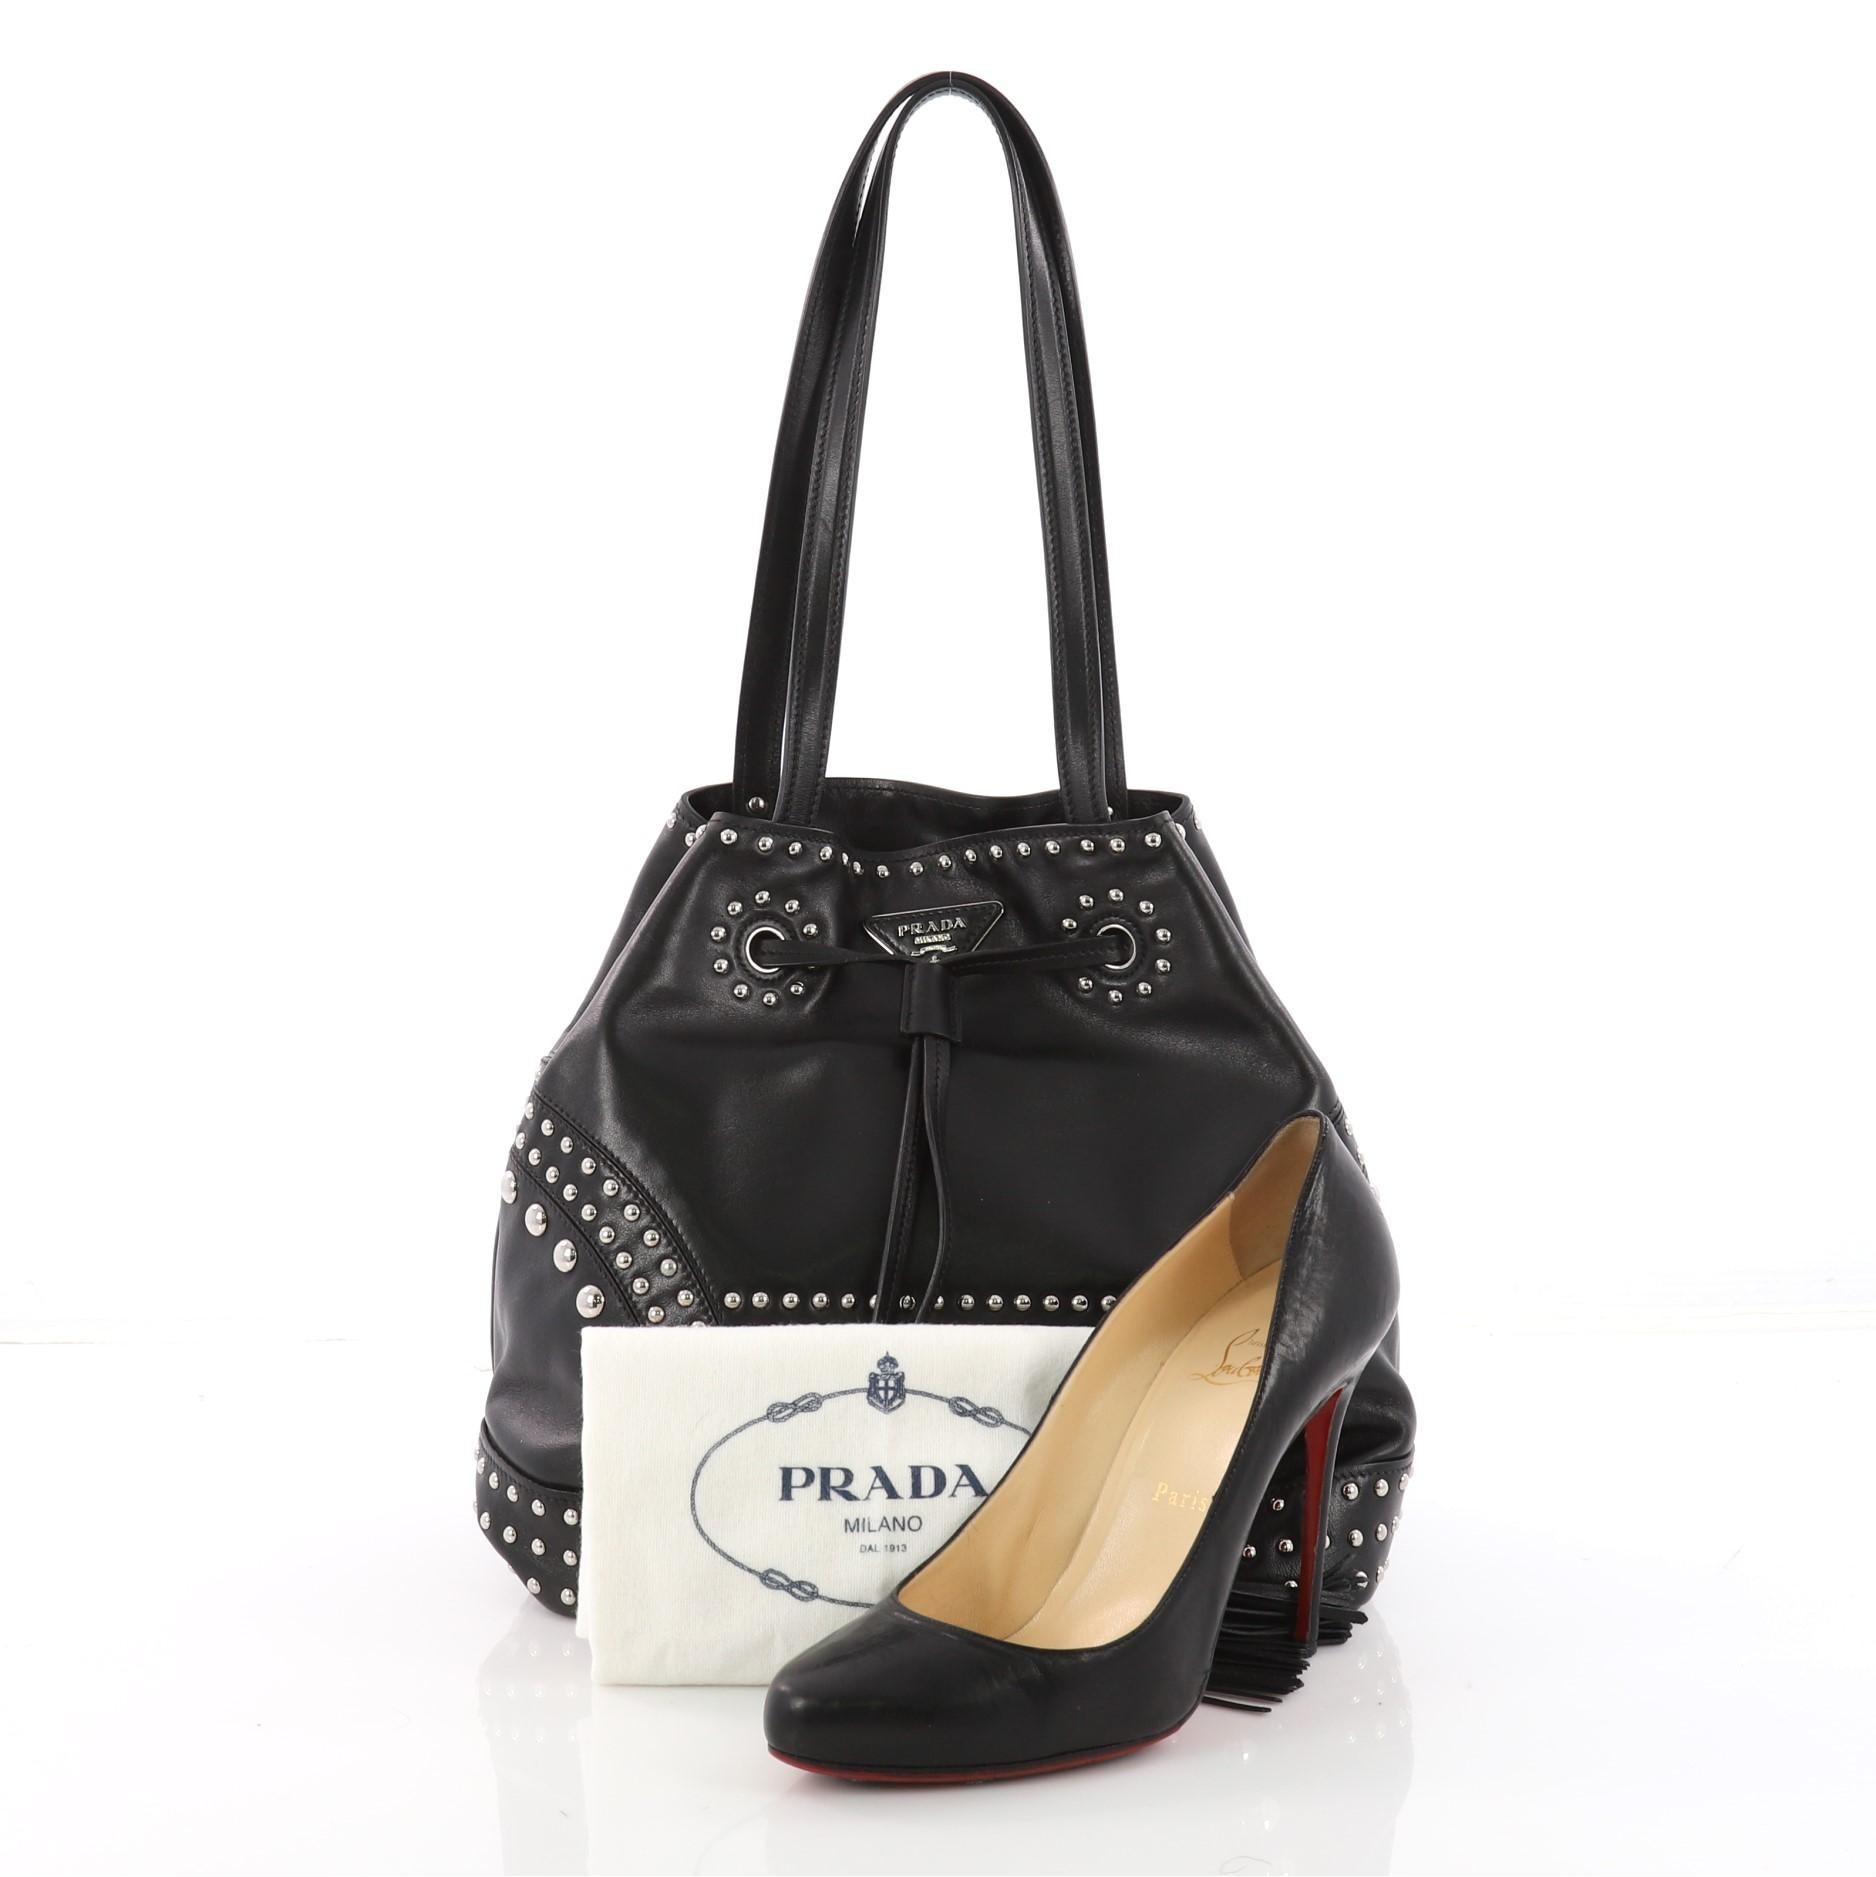 This authentic Prada Bucket Bag Studded Soft Calfskin Large is a classic bucket bag with modern minimalist touches that we love. Crafted in black studded soft calfskin leather, this bag features flat leather shoulder strap, an adjustable leather